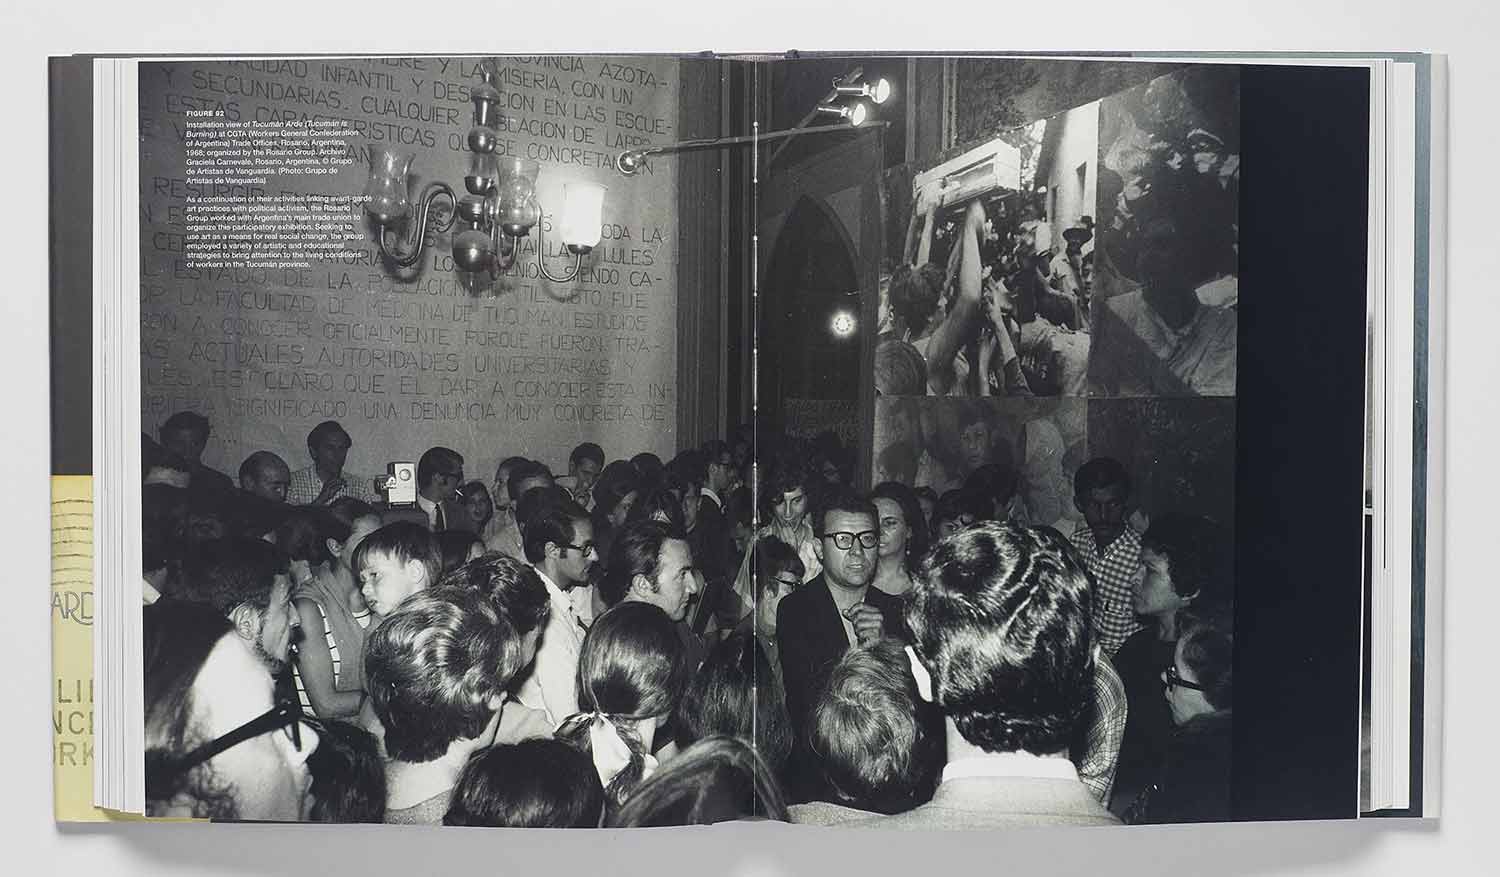 Book spread featuring an image of people crowded into an interior space